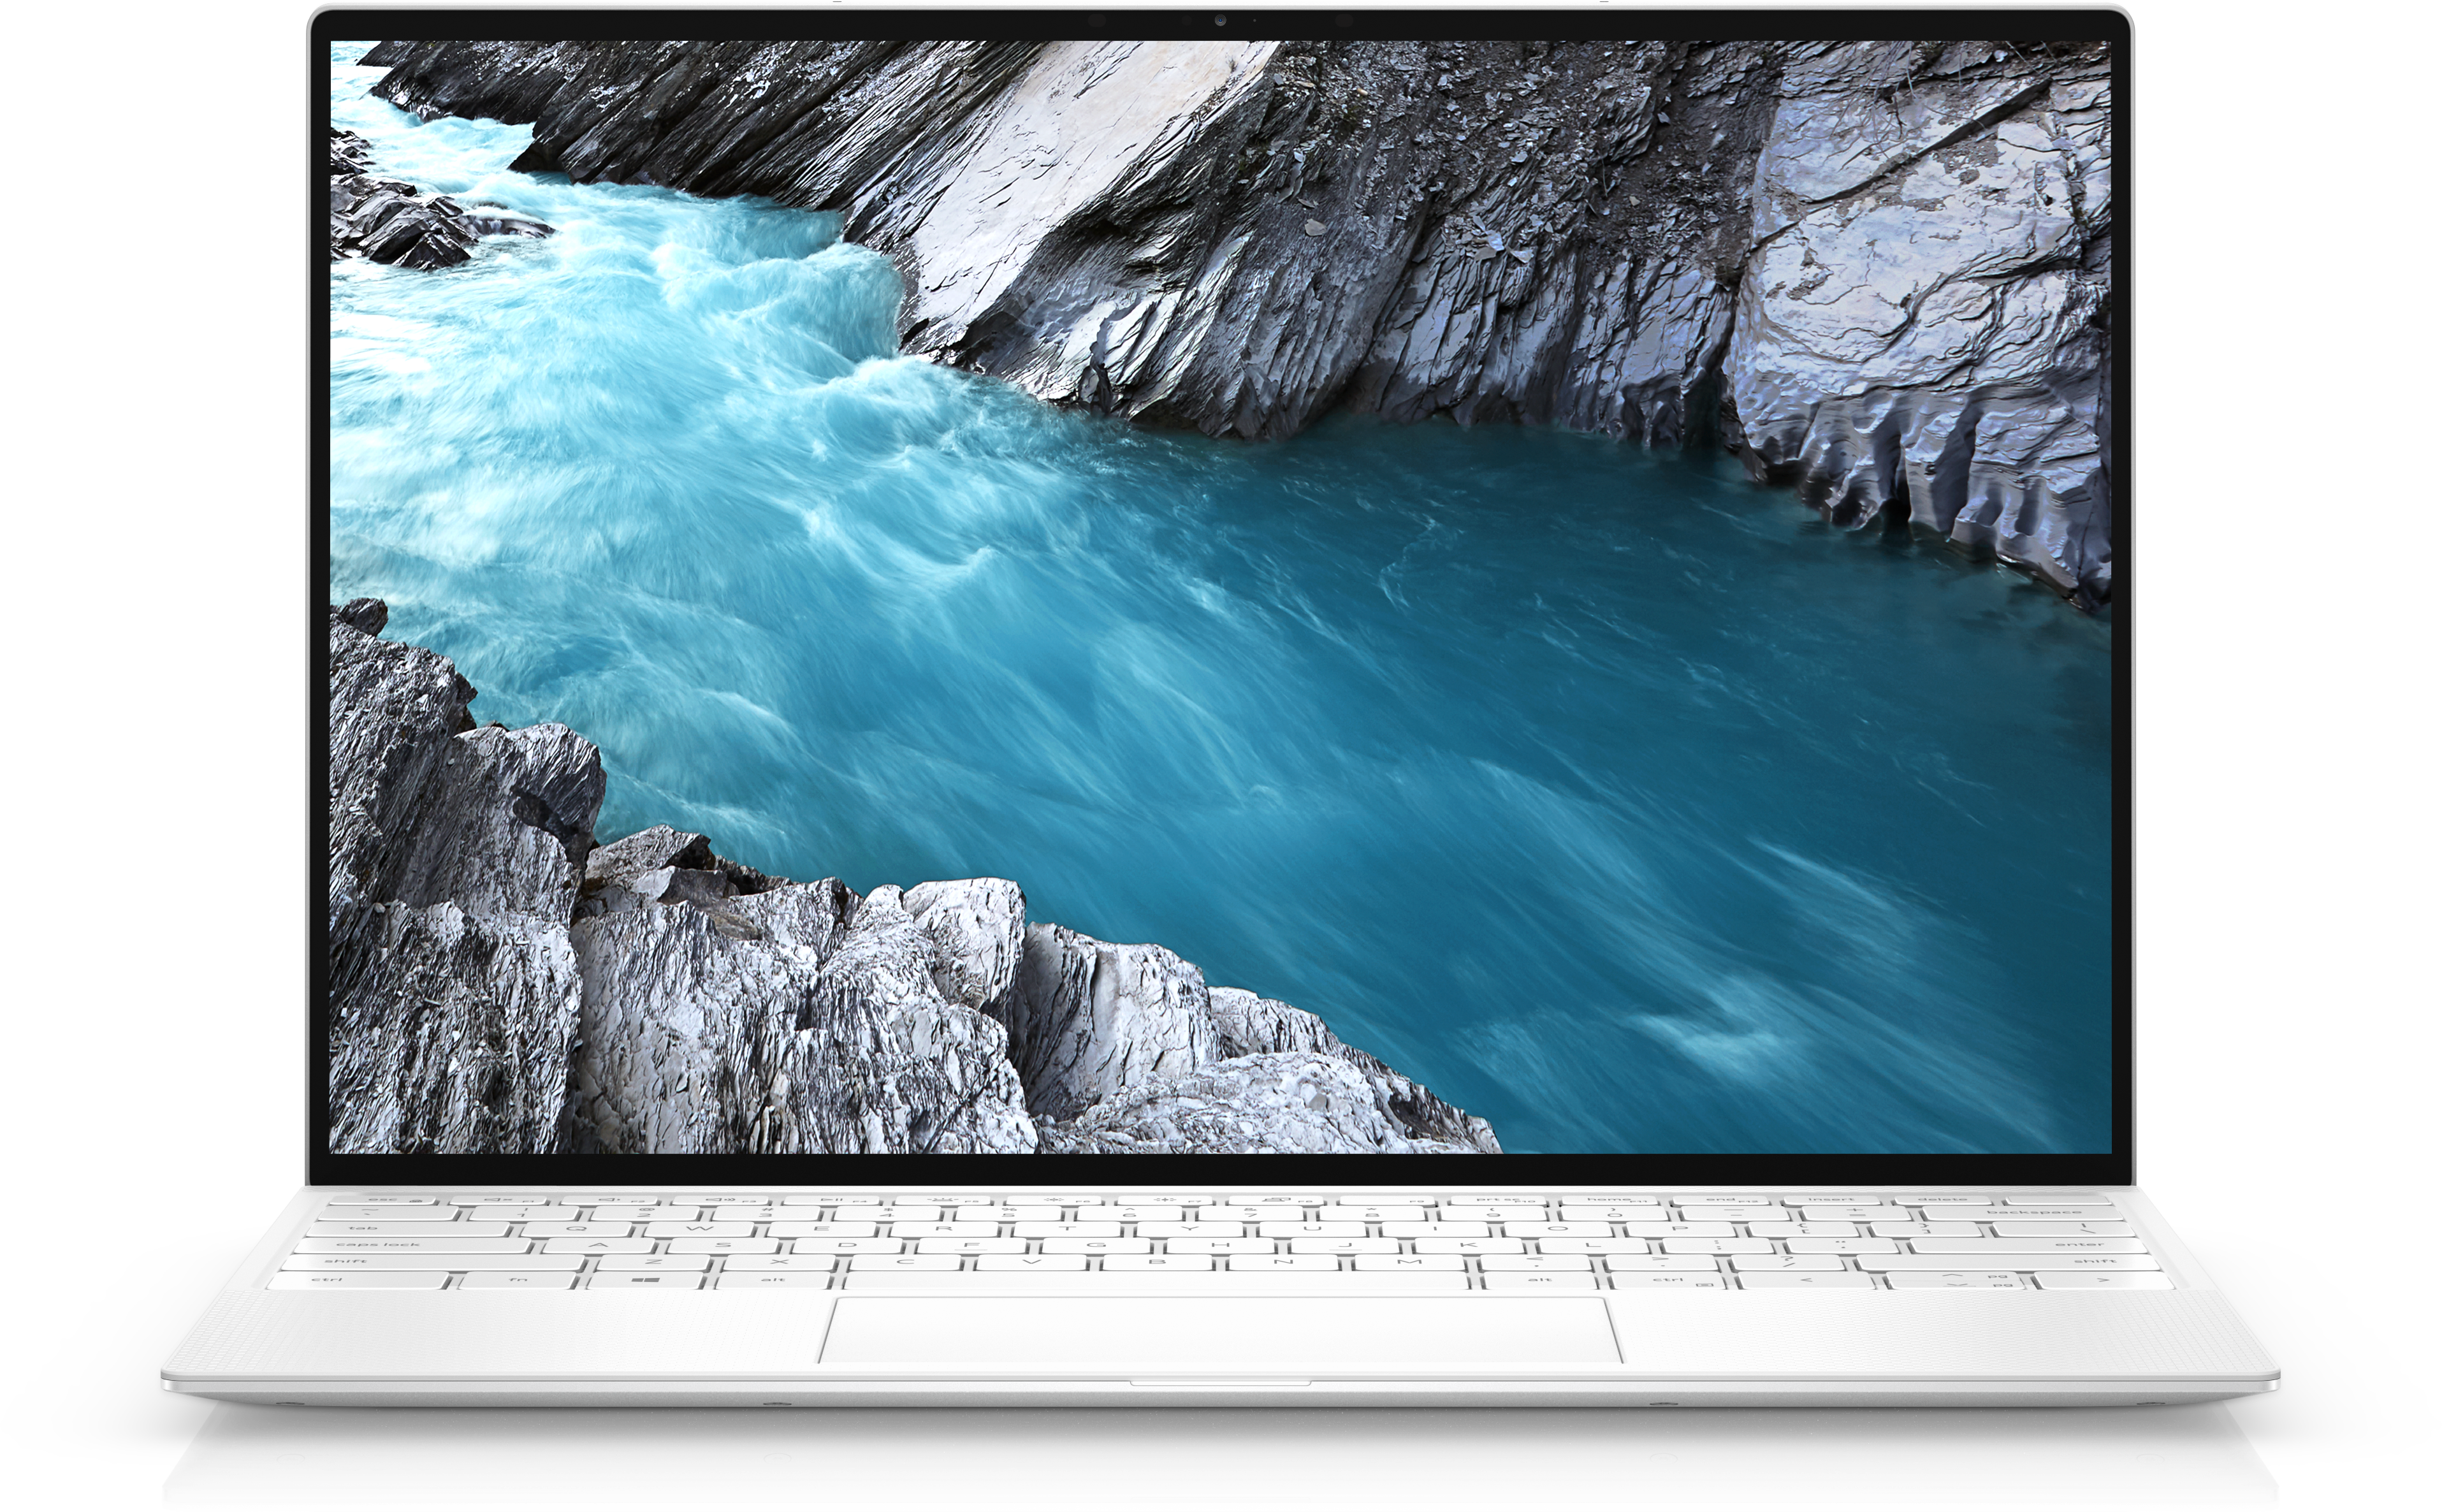 Dell XPS 13 Laptop | Dell USA